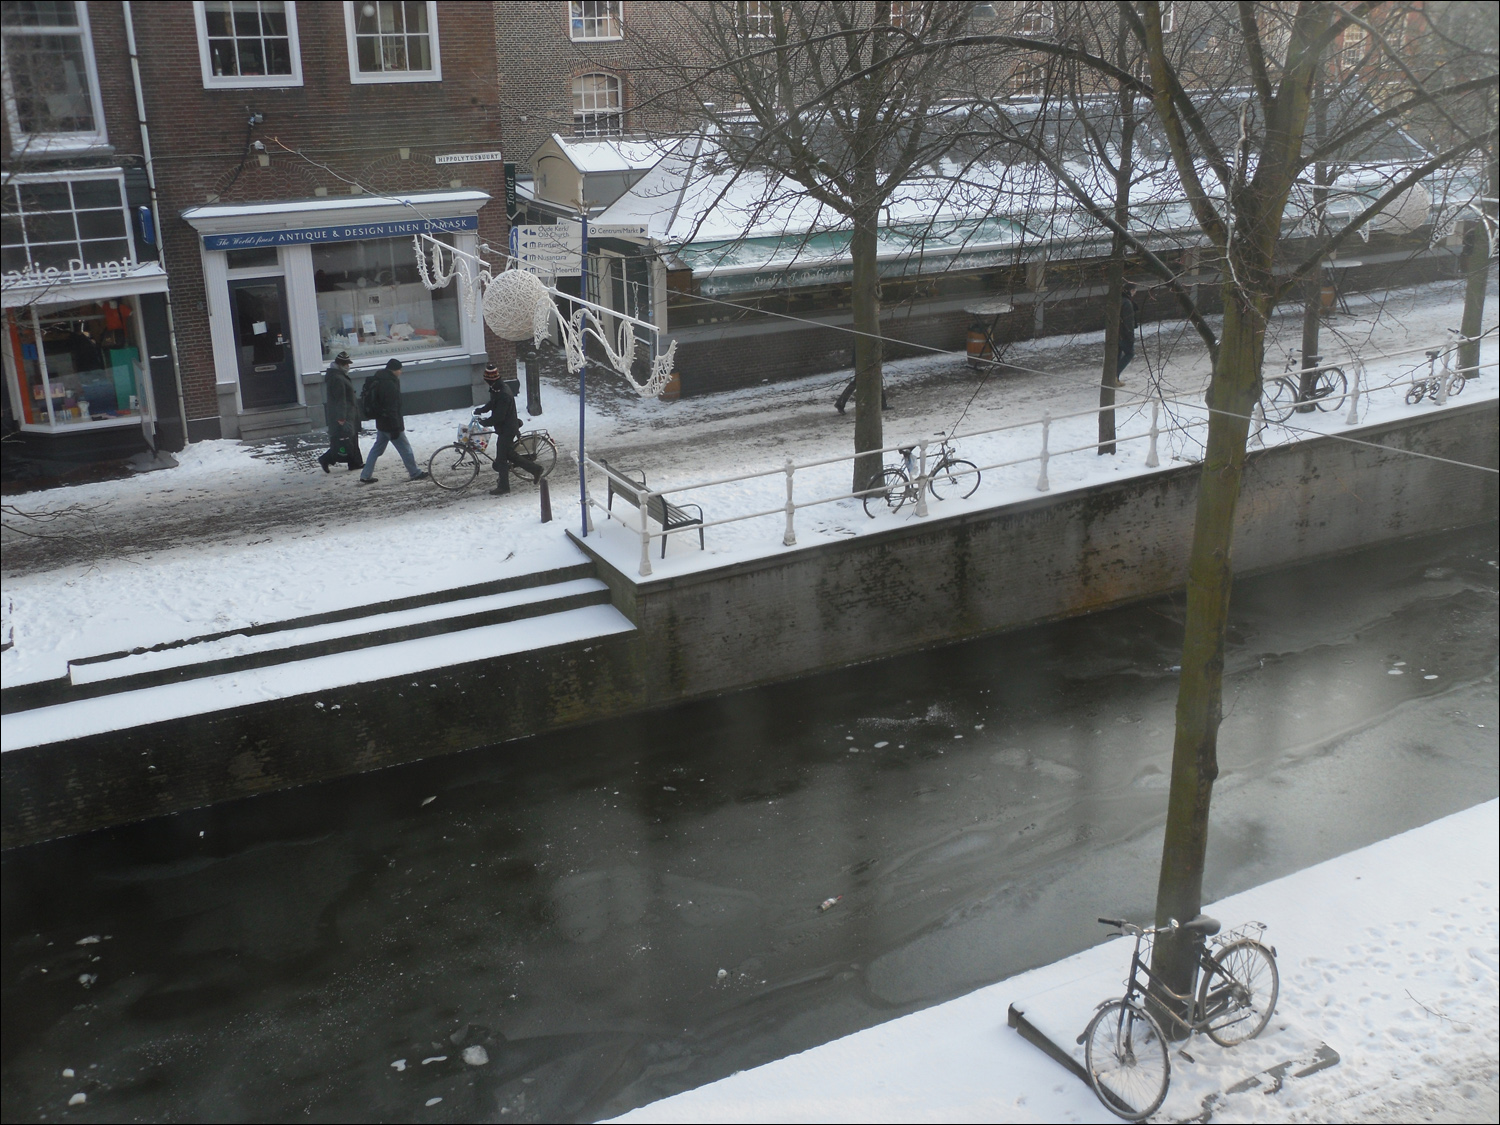 View of Hippolytusbuurt st canal from our dining room following snowfall